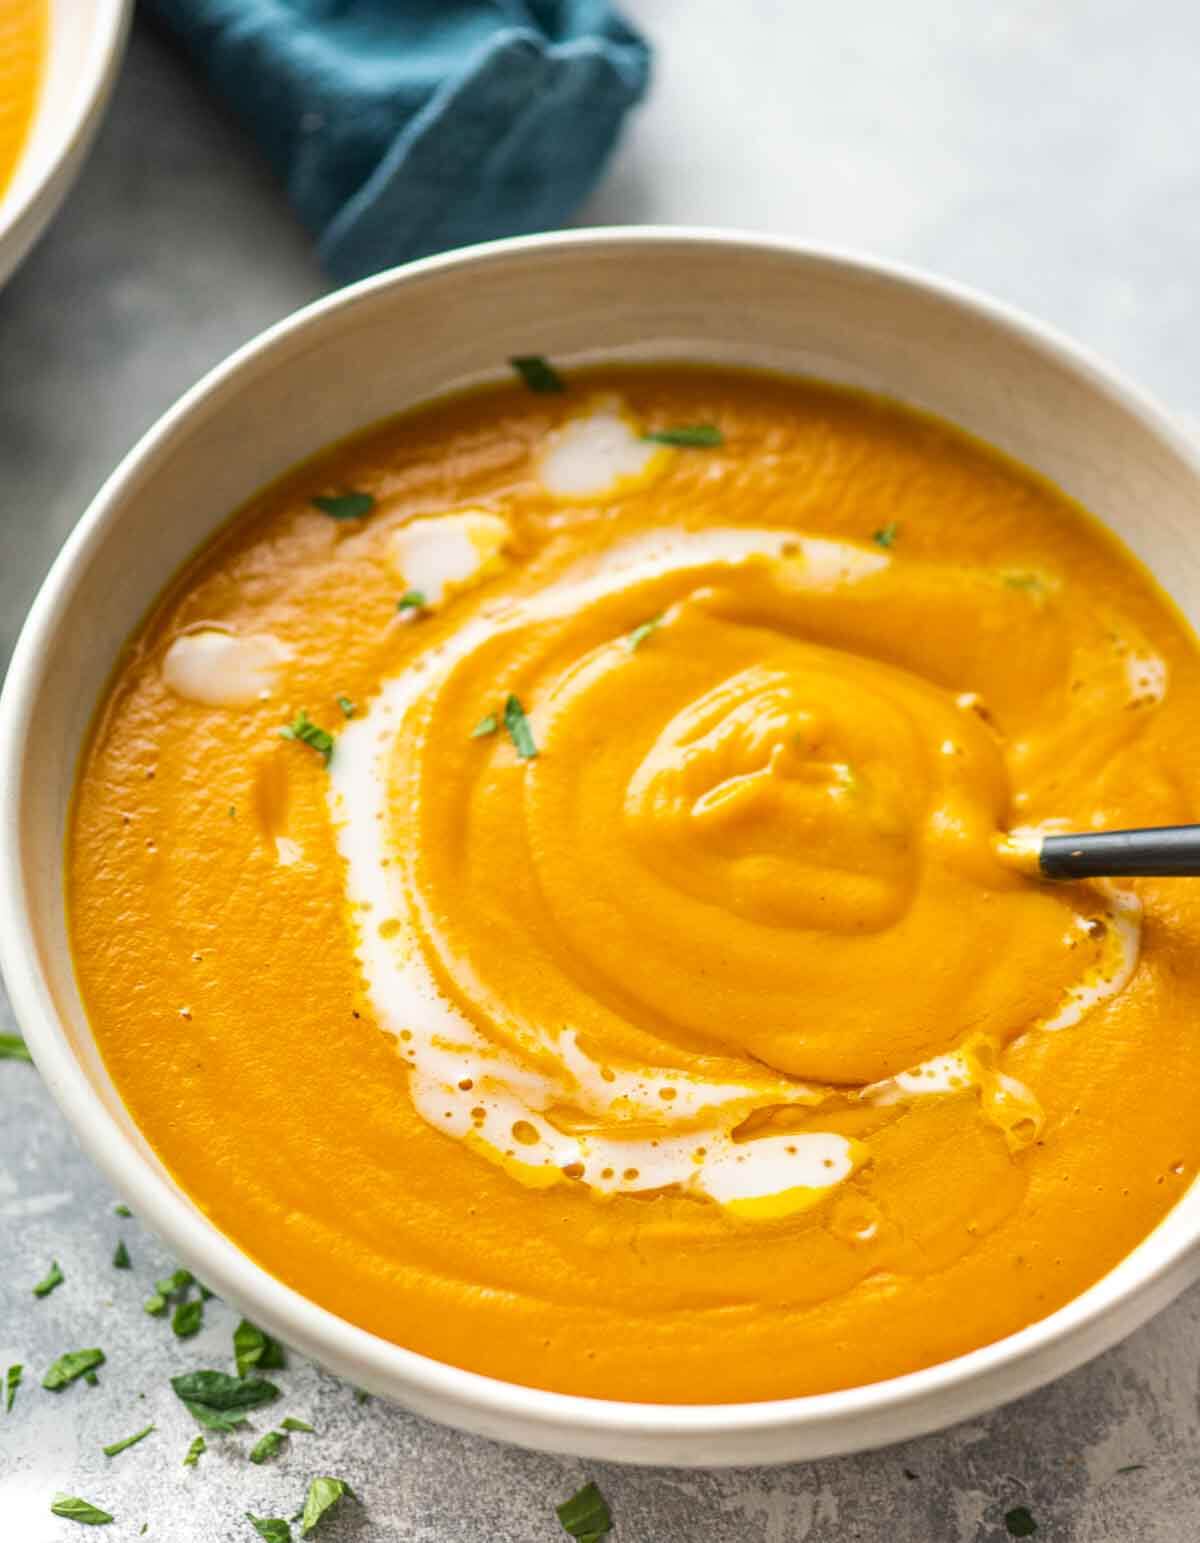 bowl of pumpkin soup with cream and parsley garnish